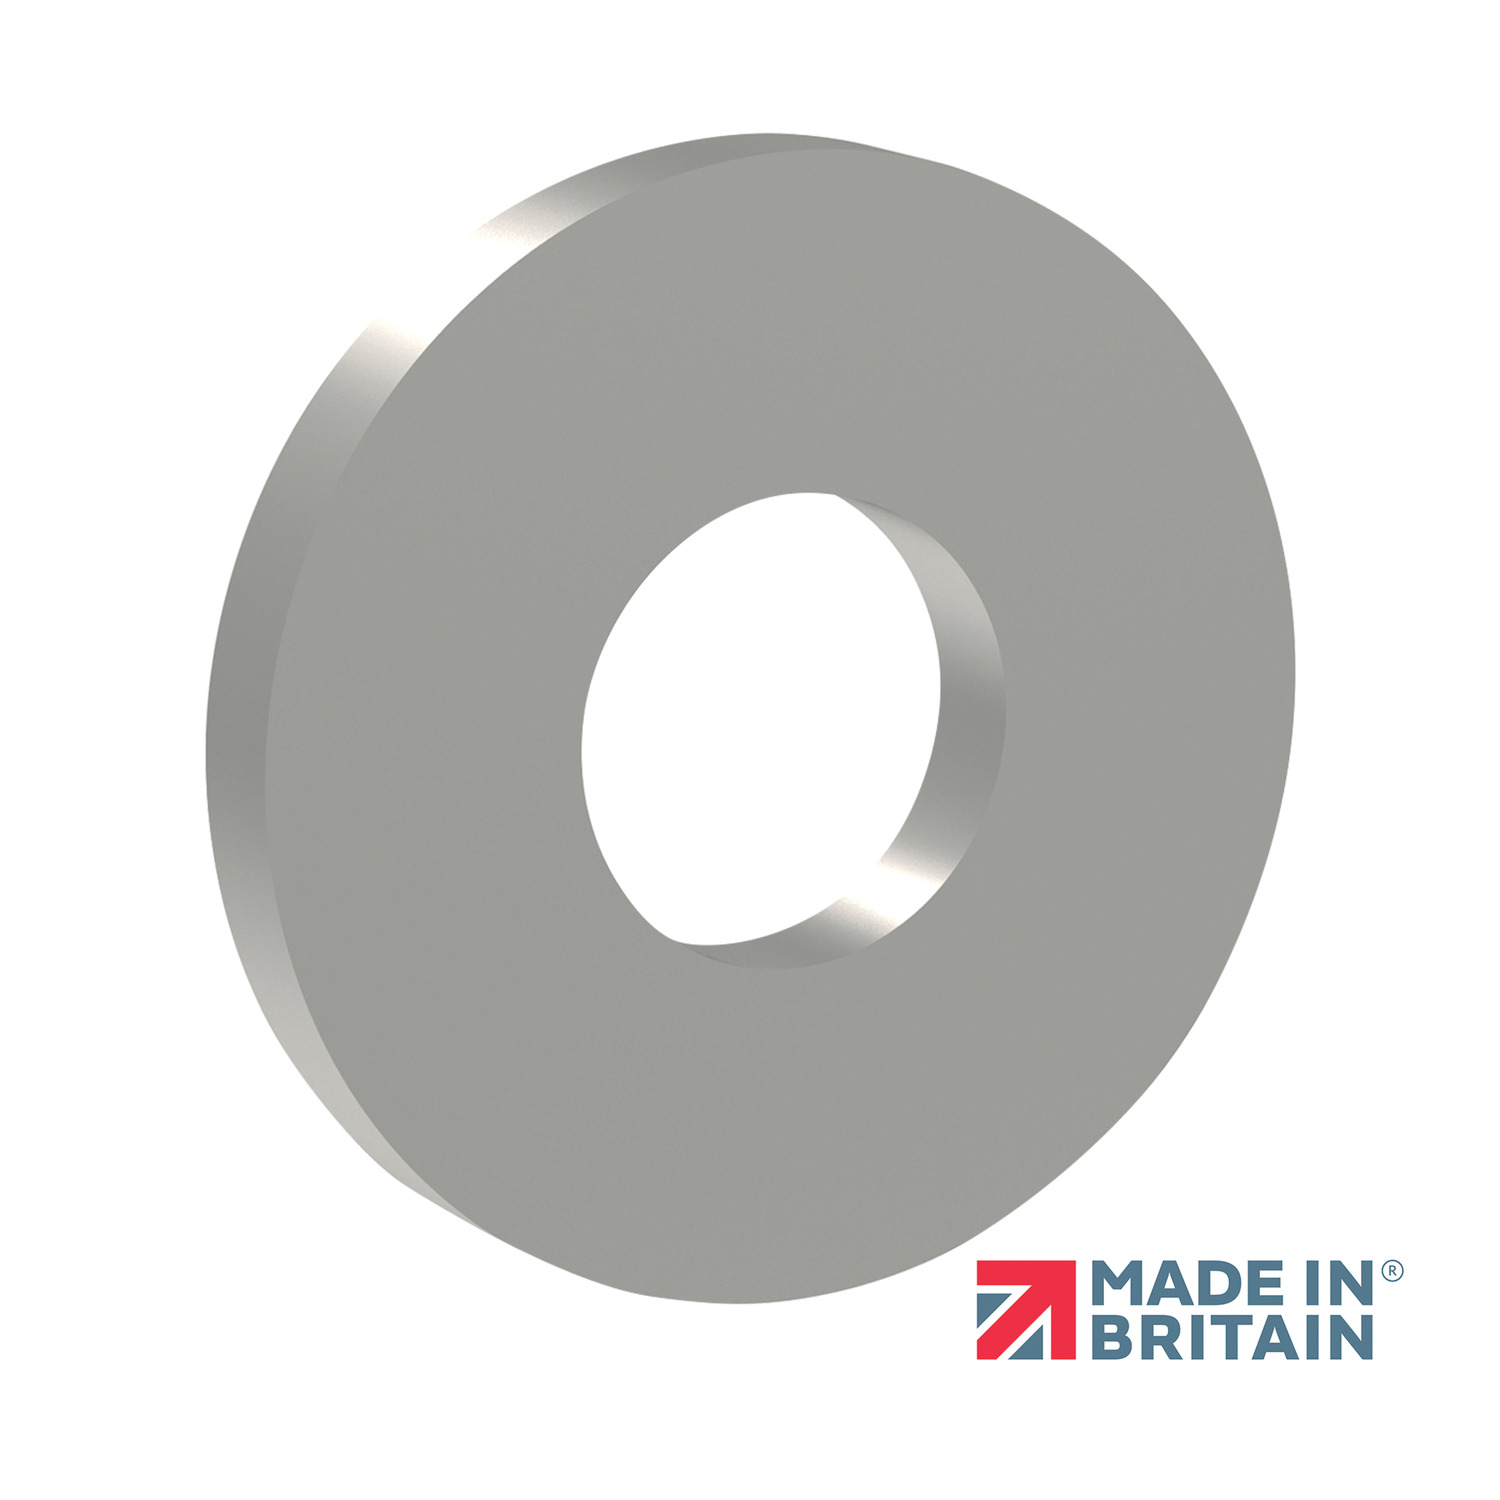 P0168.200-B4 Threaded captive washer - M20 Black oxide stainless 316